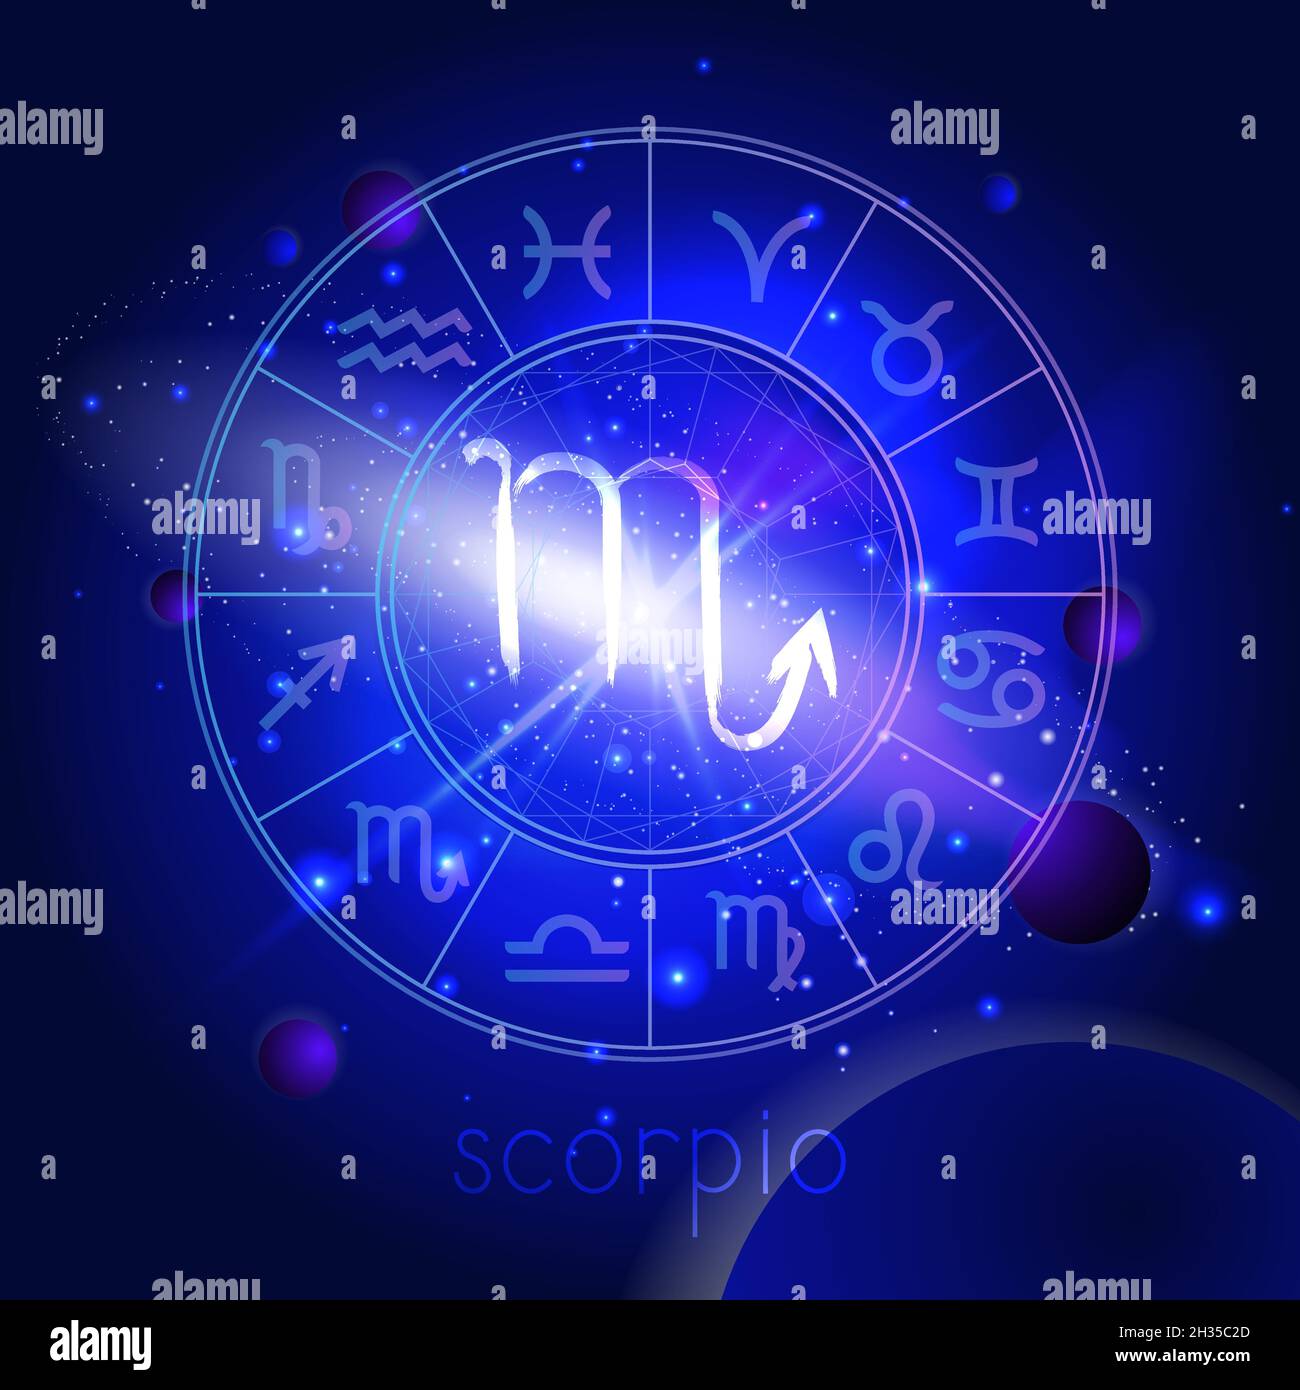 Vector illustration of sign SCORPIO with Horoscope circle against the space background with planets and stars. Sacred symbols in blue colors. Stock Vector